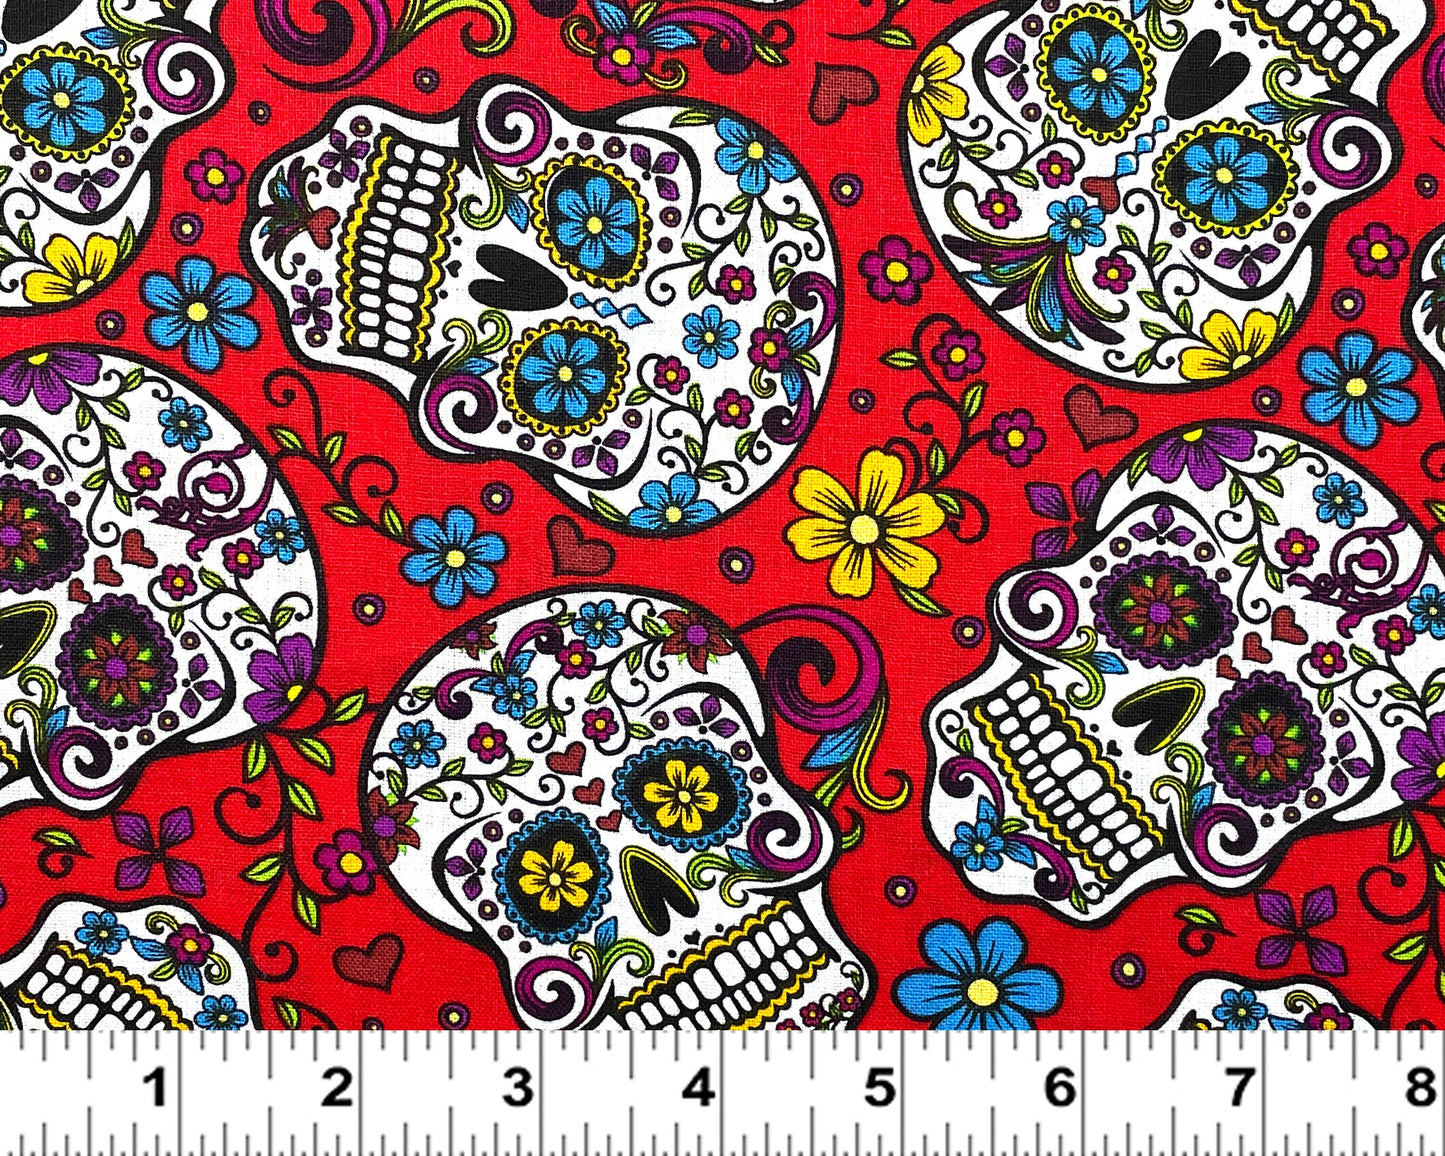 Sugar Skull fabric - Folkloric Sugar Skull print - Day of the Dead fabric - 100% Cotton - Colorful skull material - Ships NEXT DAY